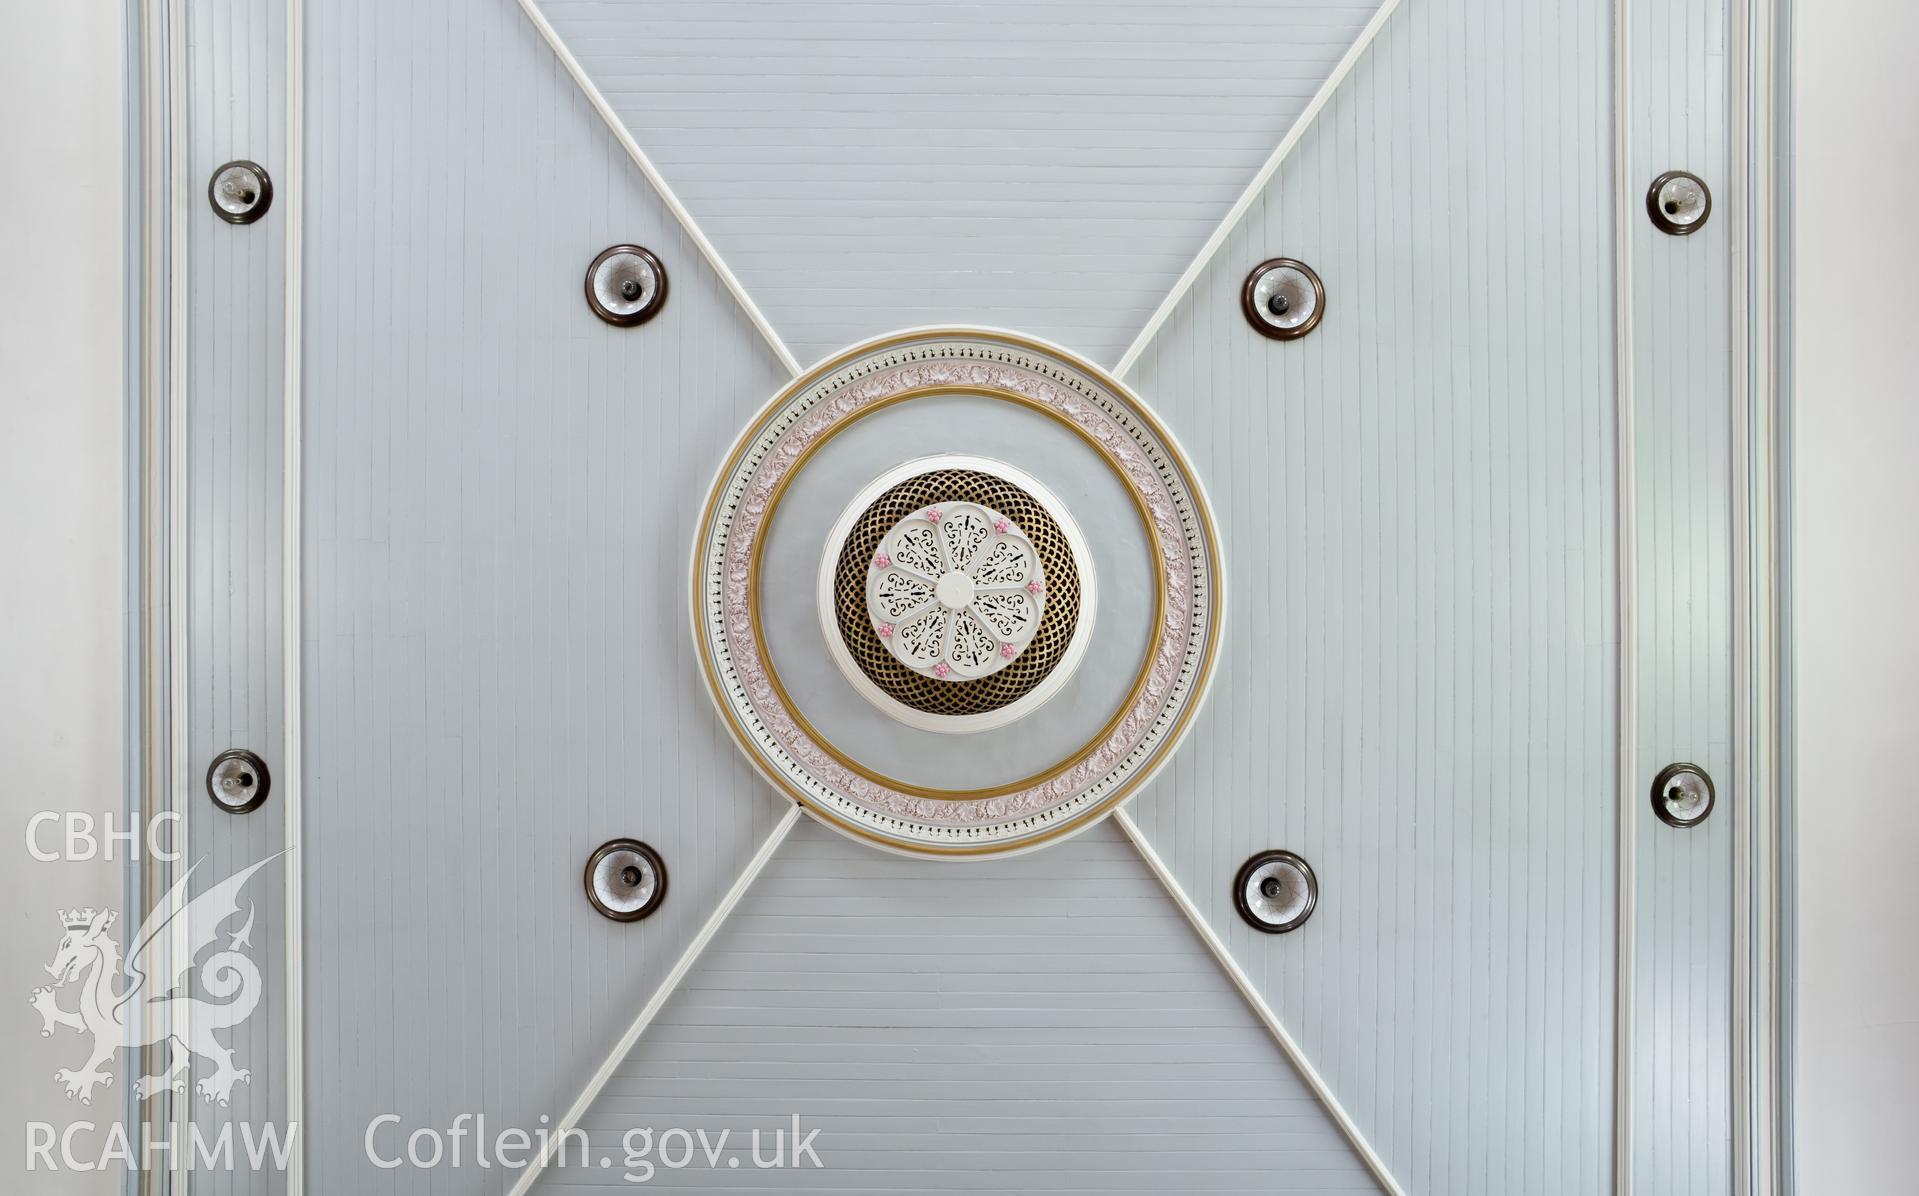 Detail of central ceiling rose.